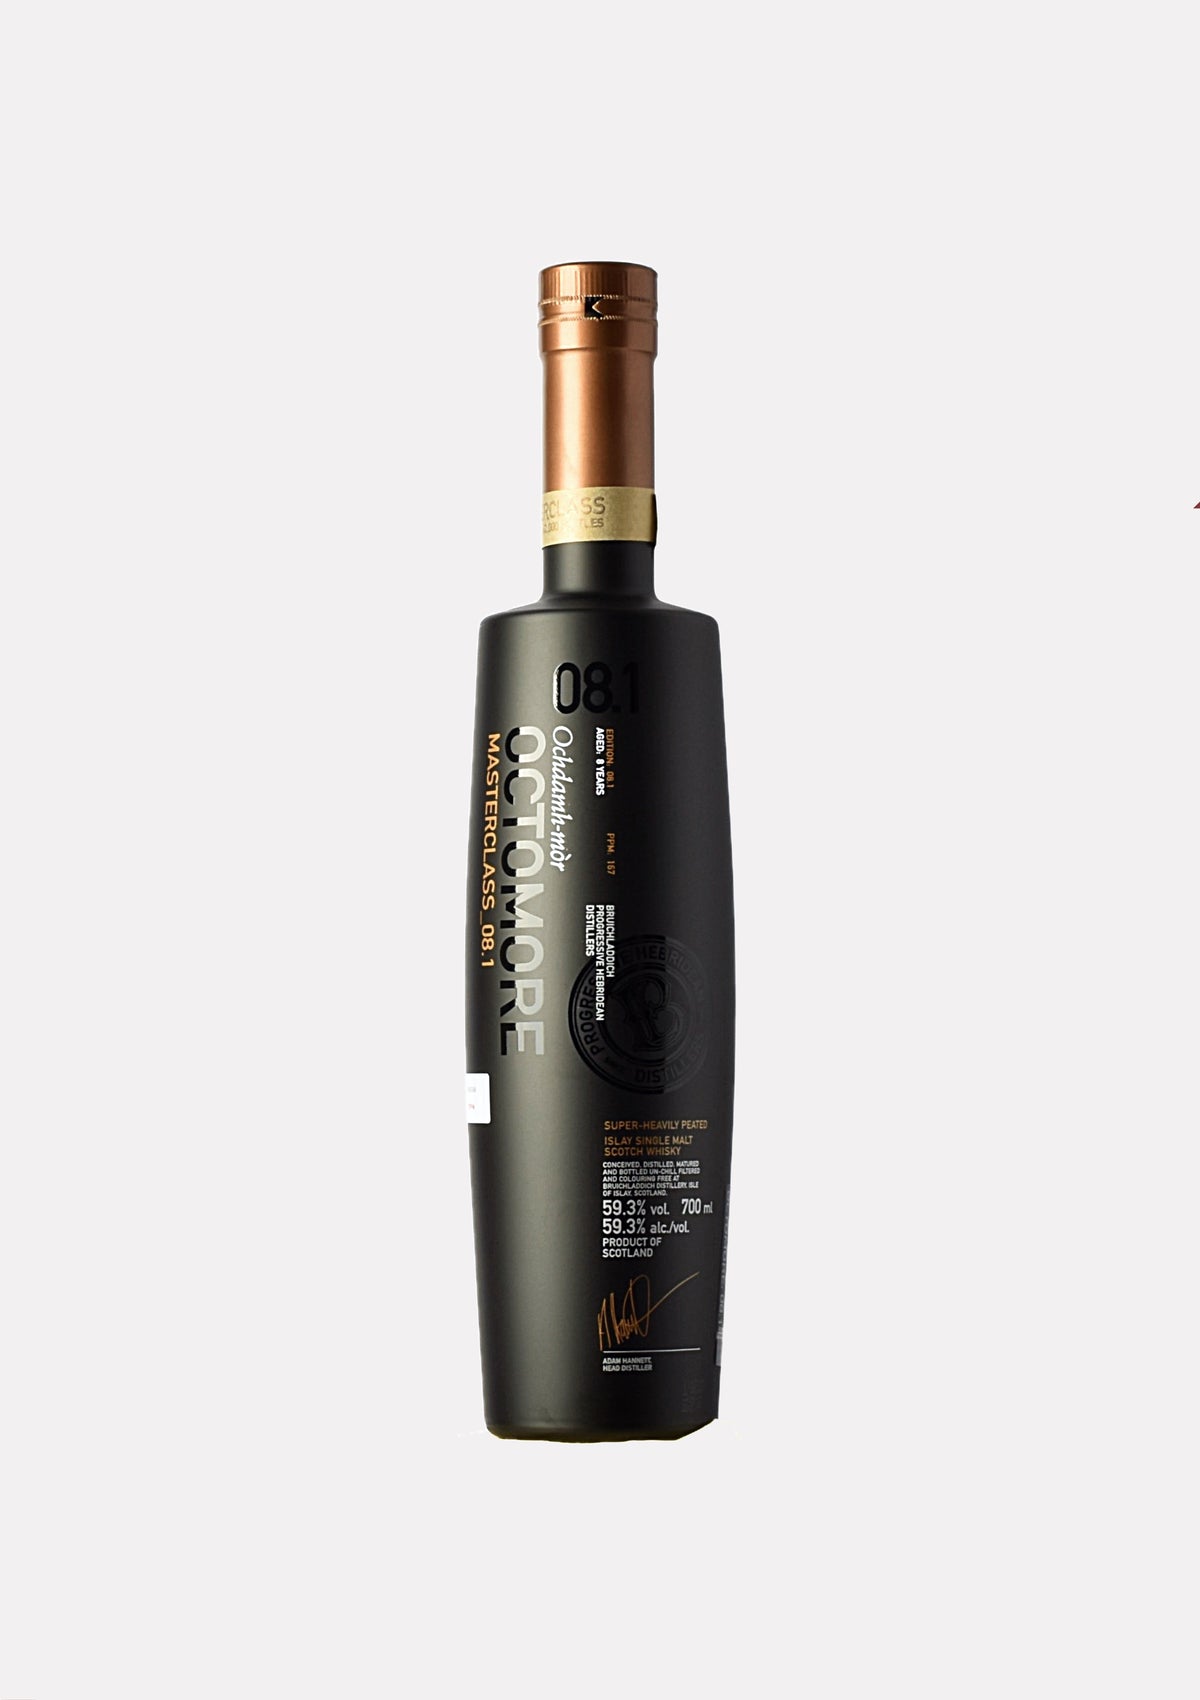 Octomore 2008- 2017 8 Jahre 08.1 167 ppm